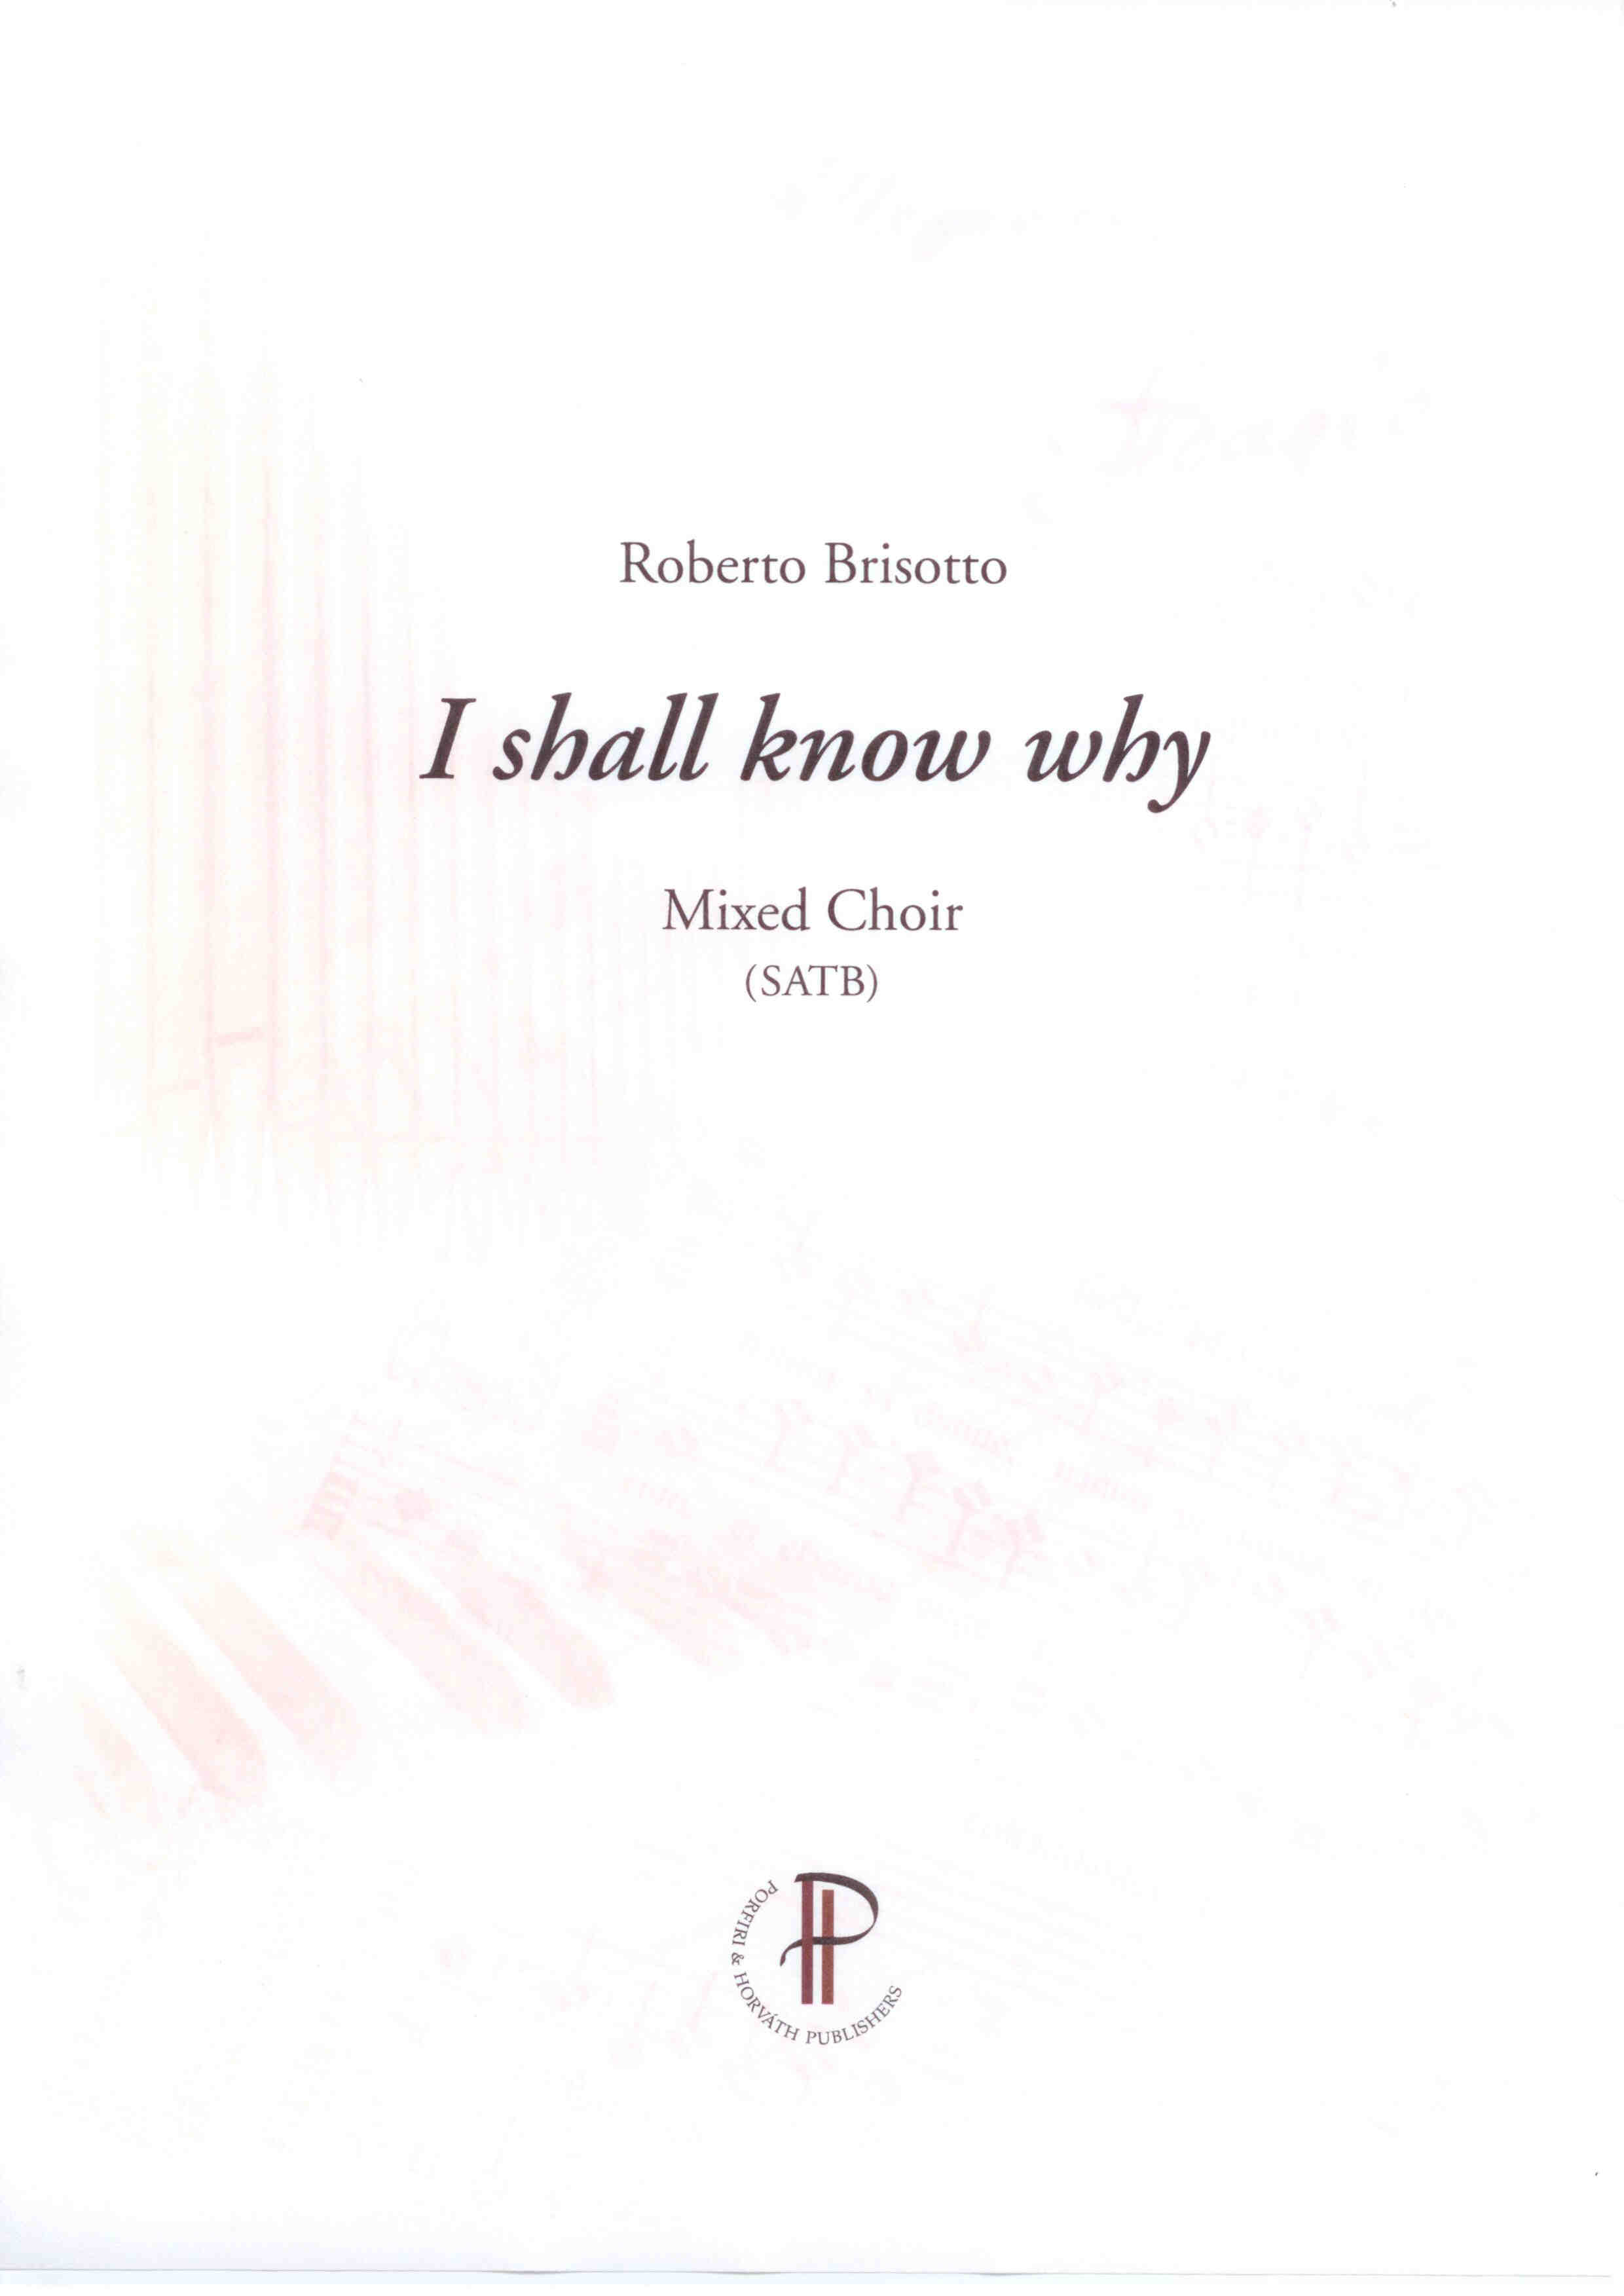 I shall know why - Show sample score